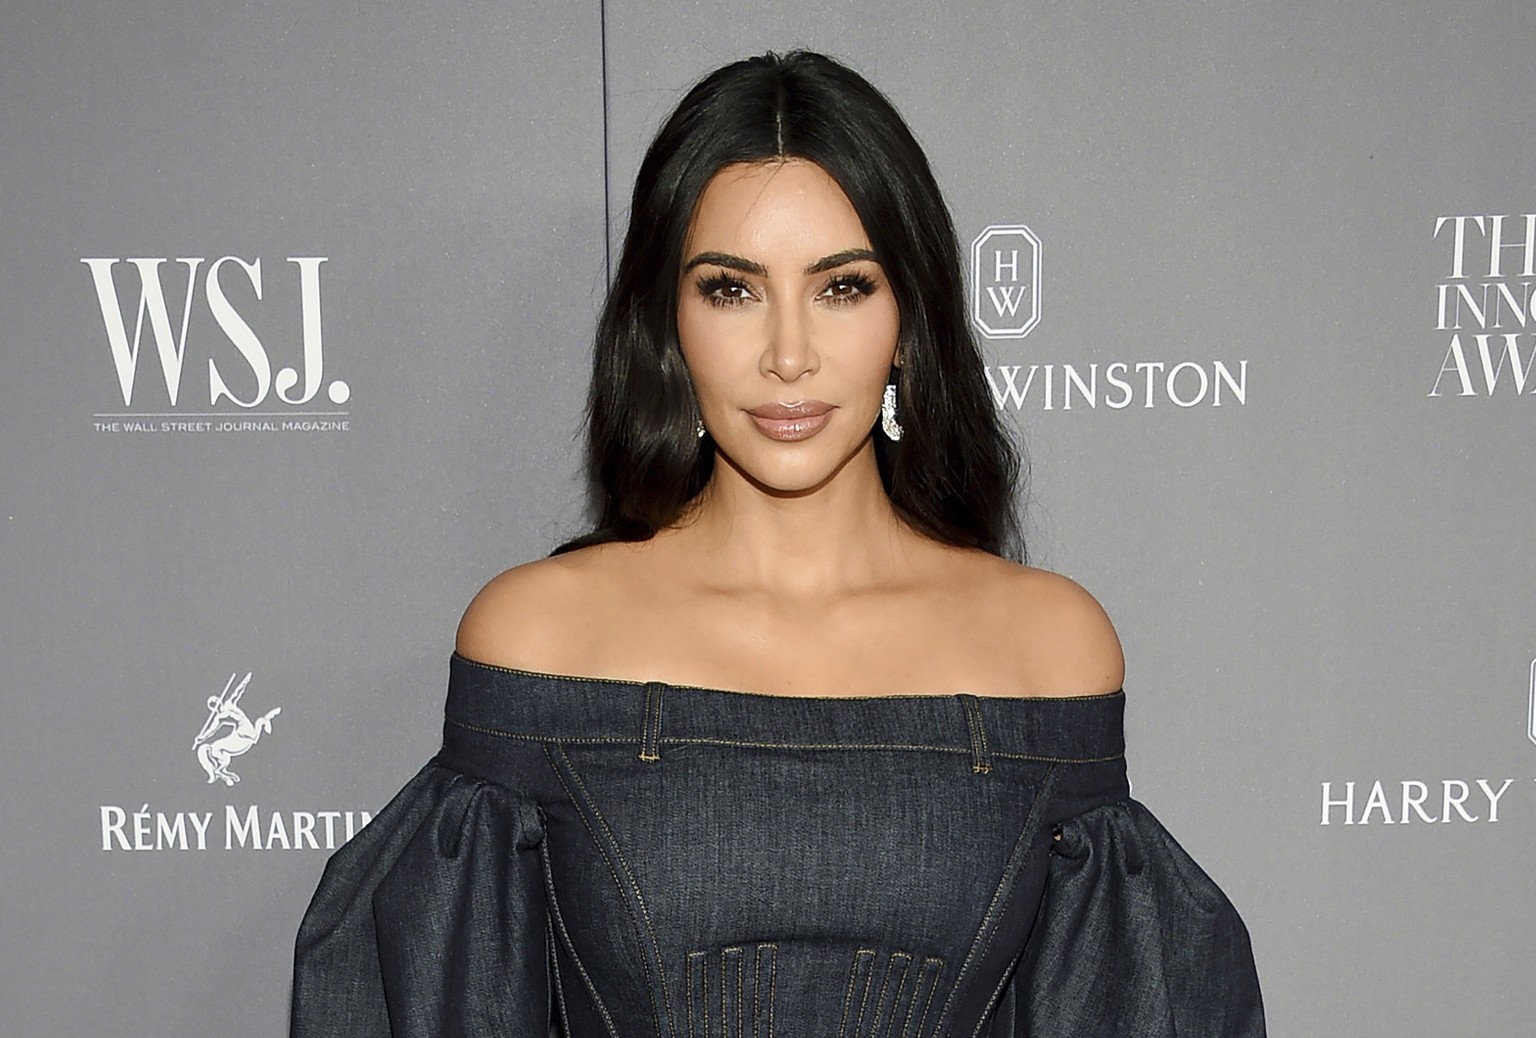 FILE - In this Nov. 6, 2019, file photo, Kim Kardashian attends the WSJ. Magazine 2019 Innovator Awards at the Museum of Modern Art on in New York. Kardashian is hosting &quot;Saturday Night Live,&quo ...